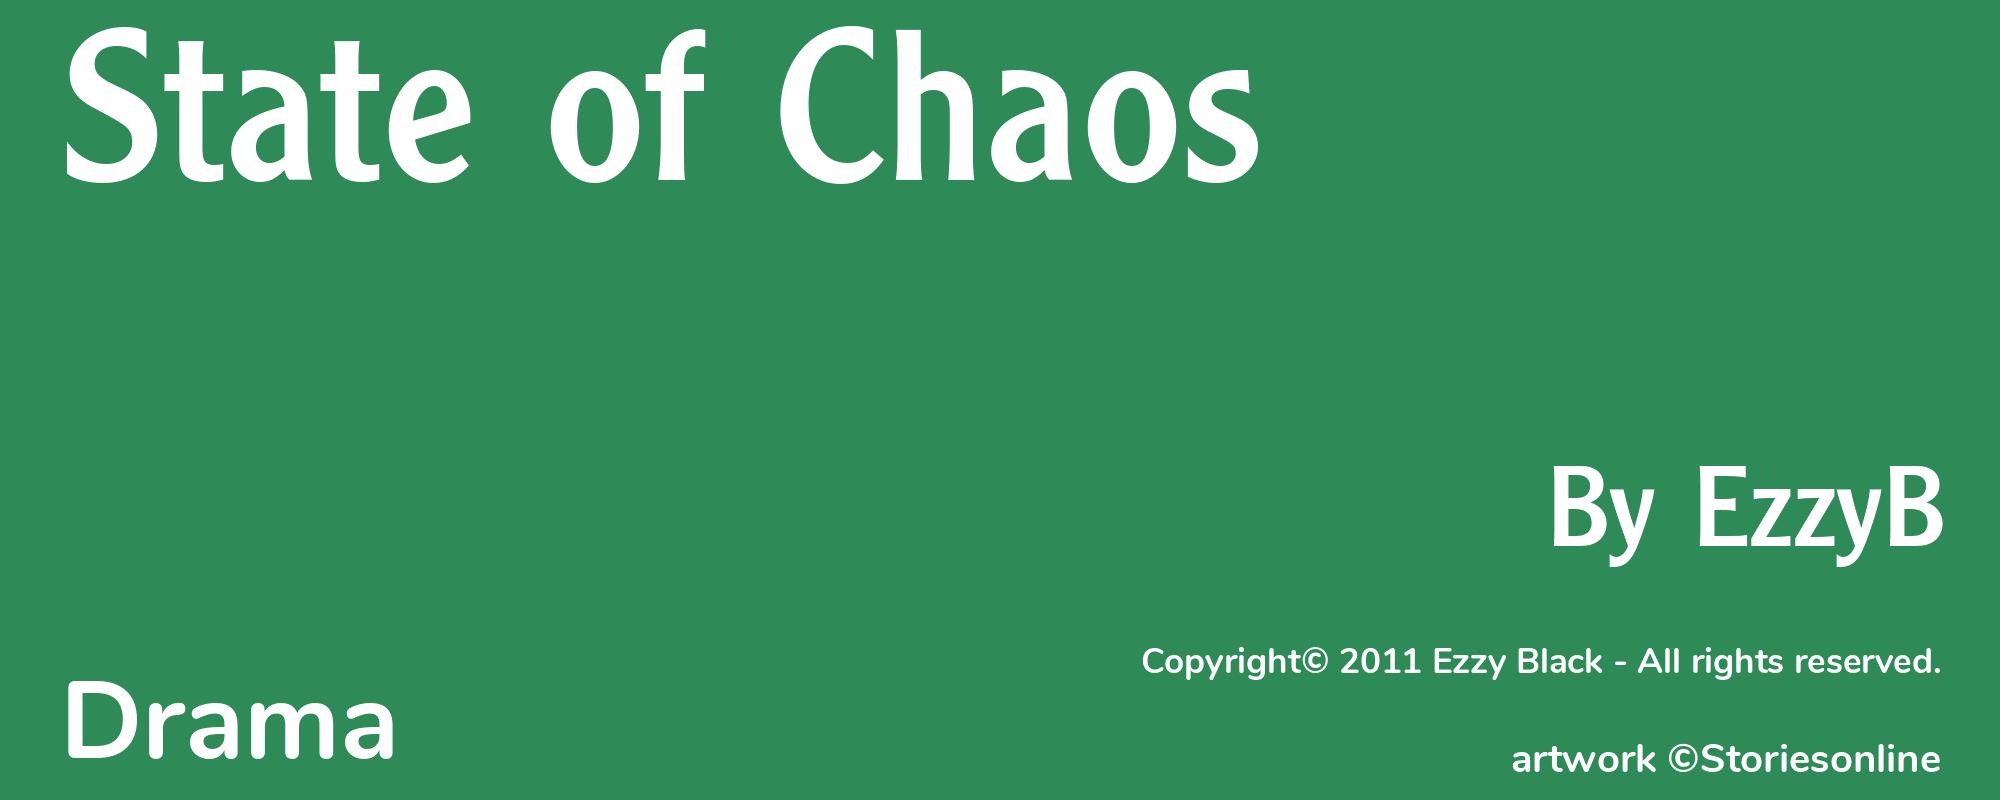 State of Chaos - Cover